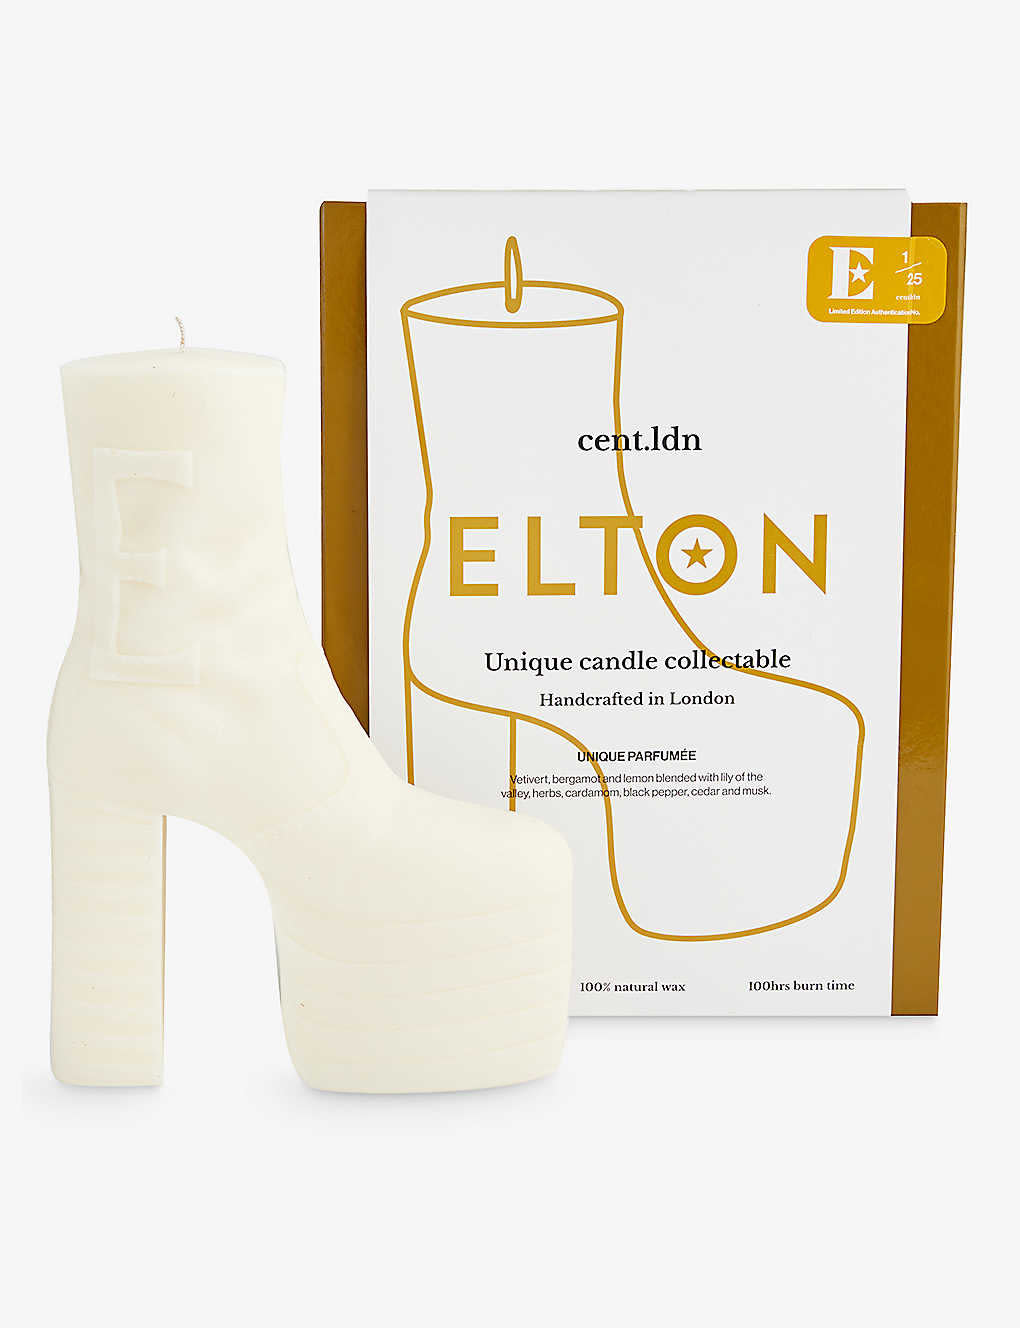 The Elton candle from Cent.Ldn